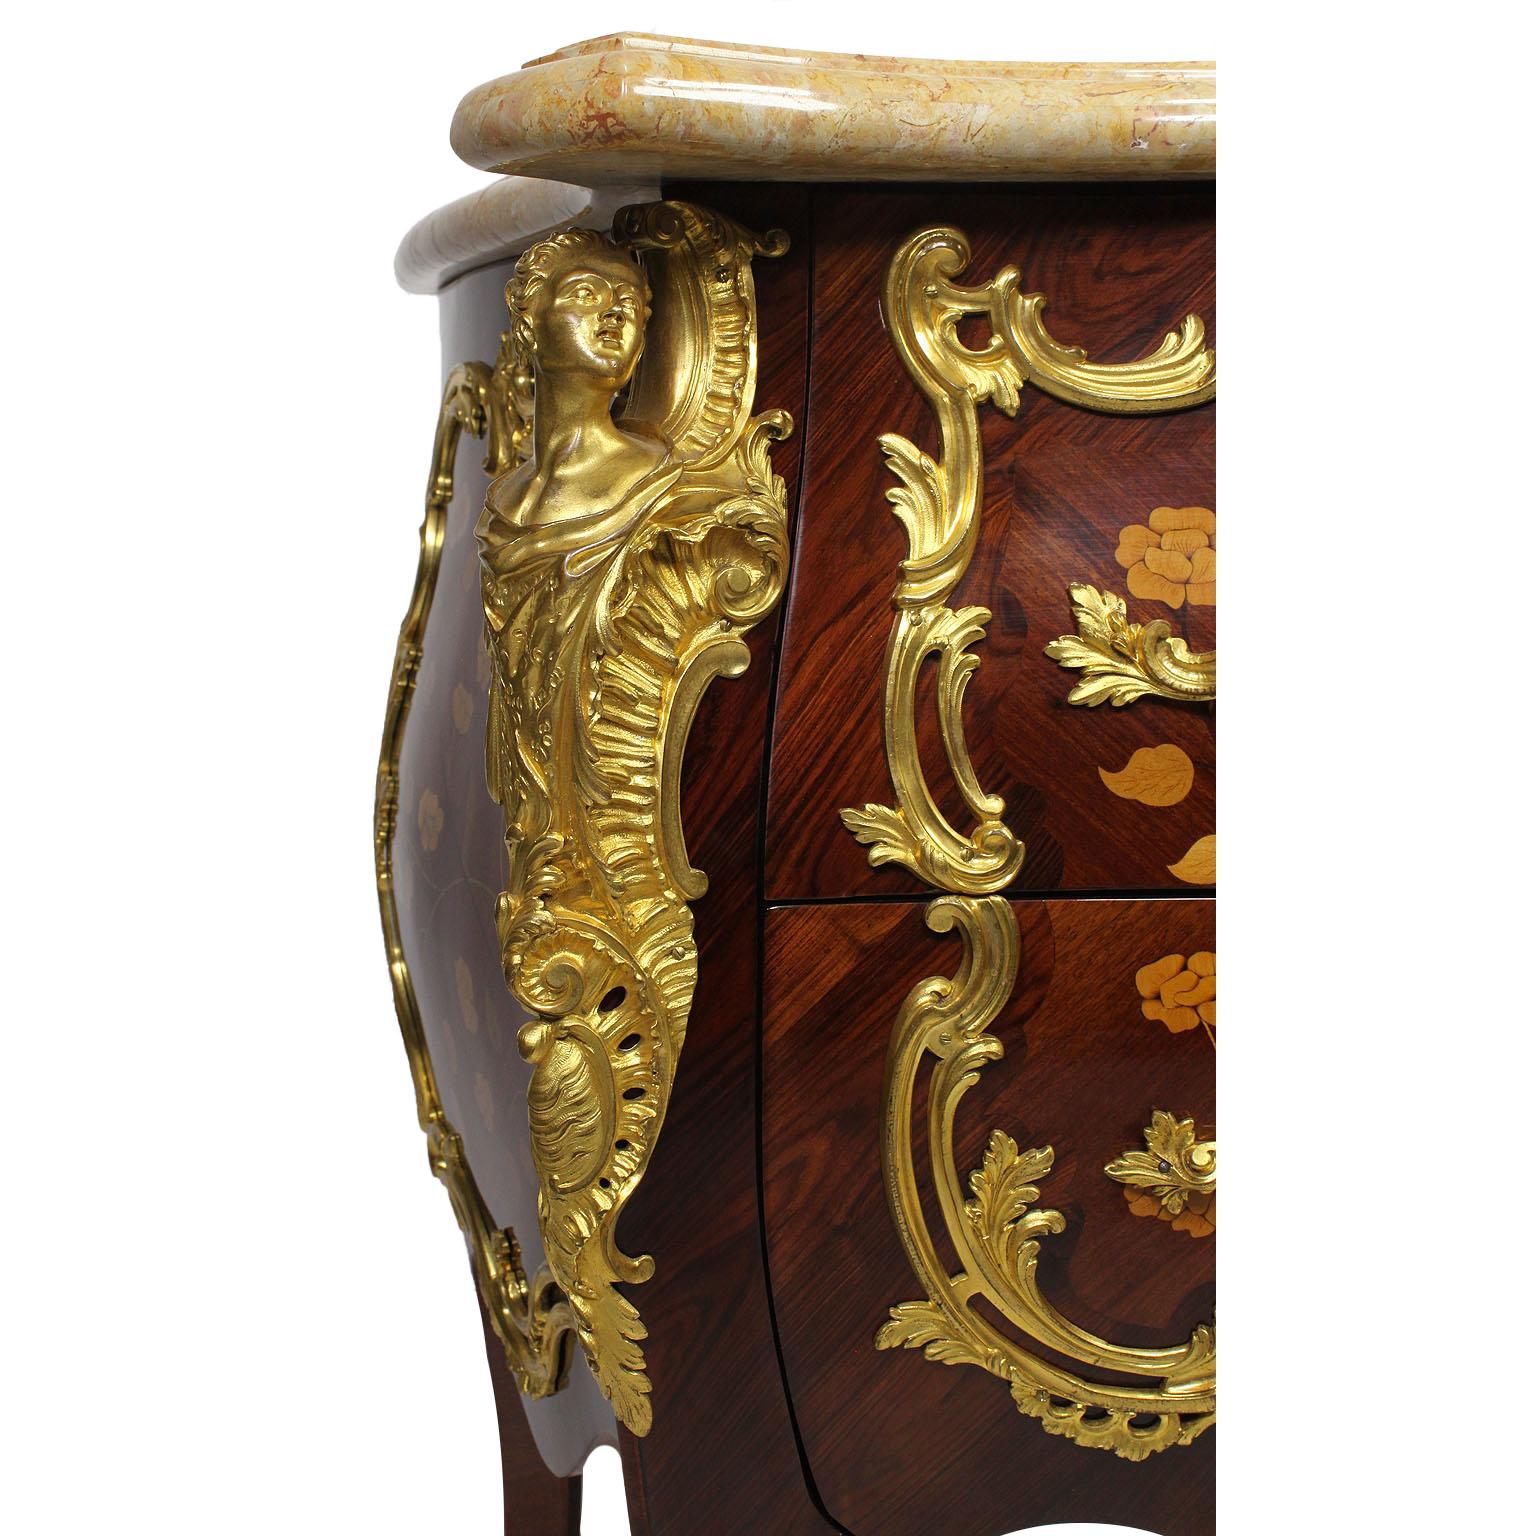 French 19th Century Louis XV Style Gilt Bronze-Mounted Marquetry Commodes, Pair For Sale 4